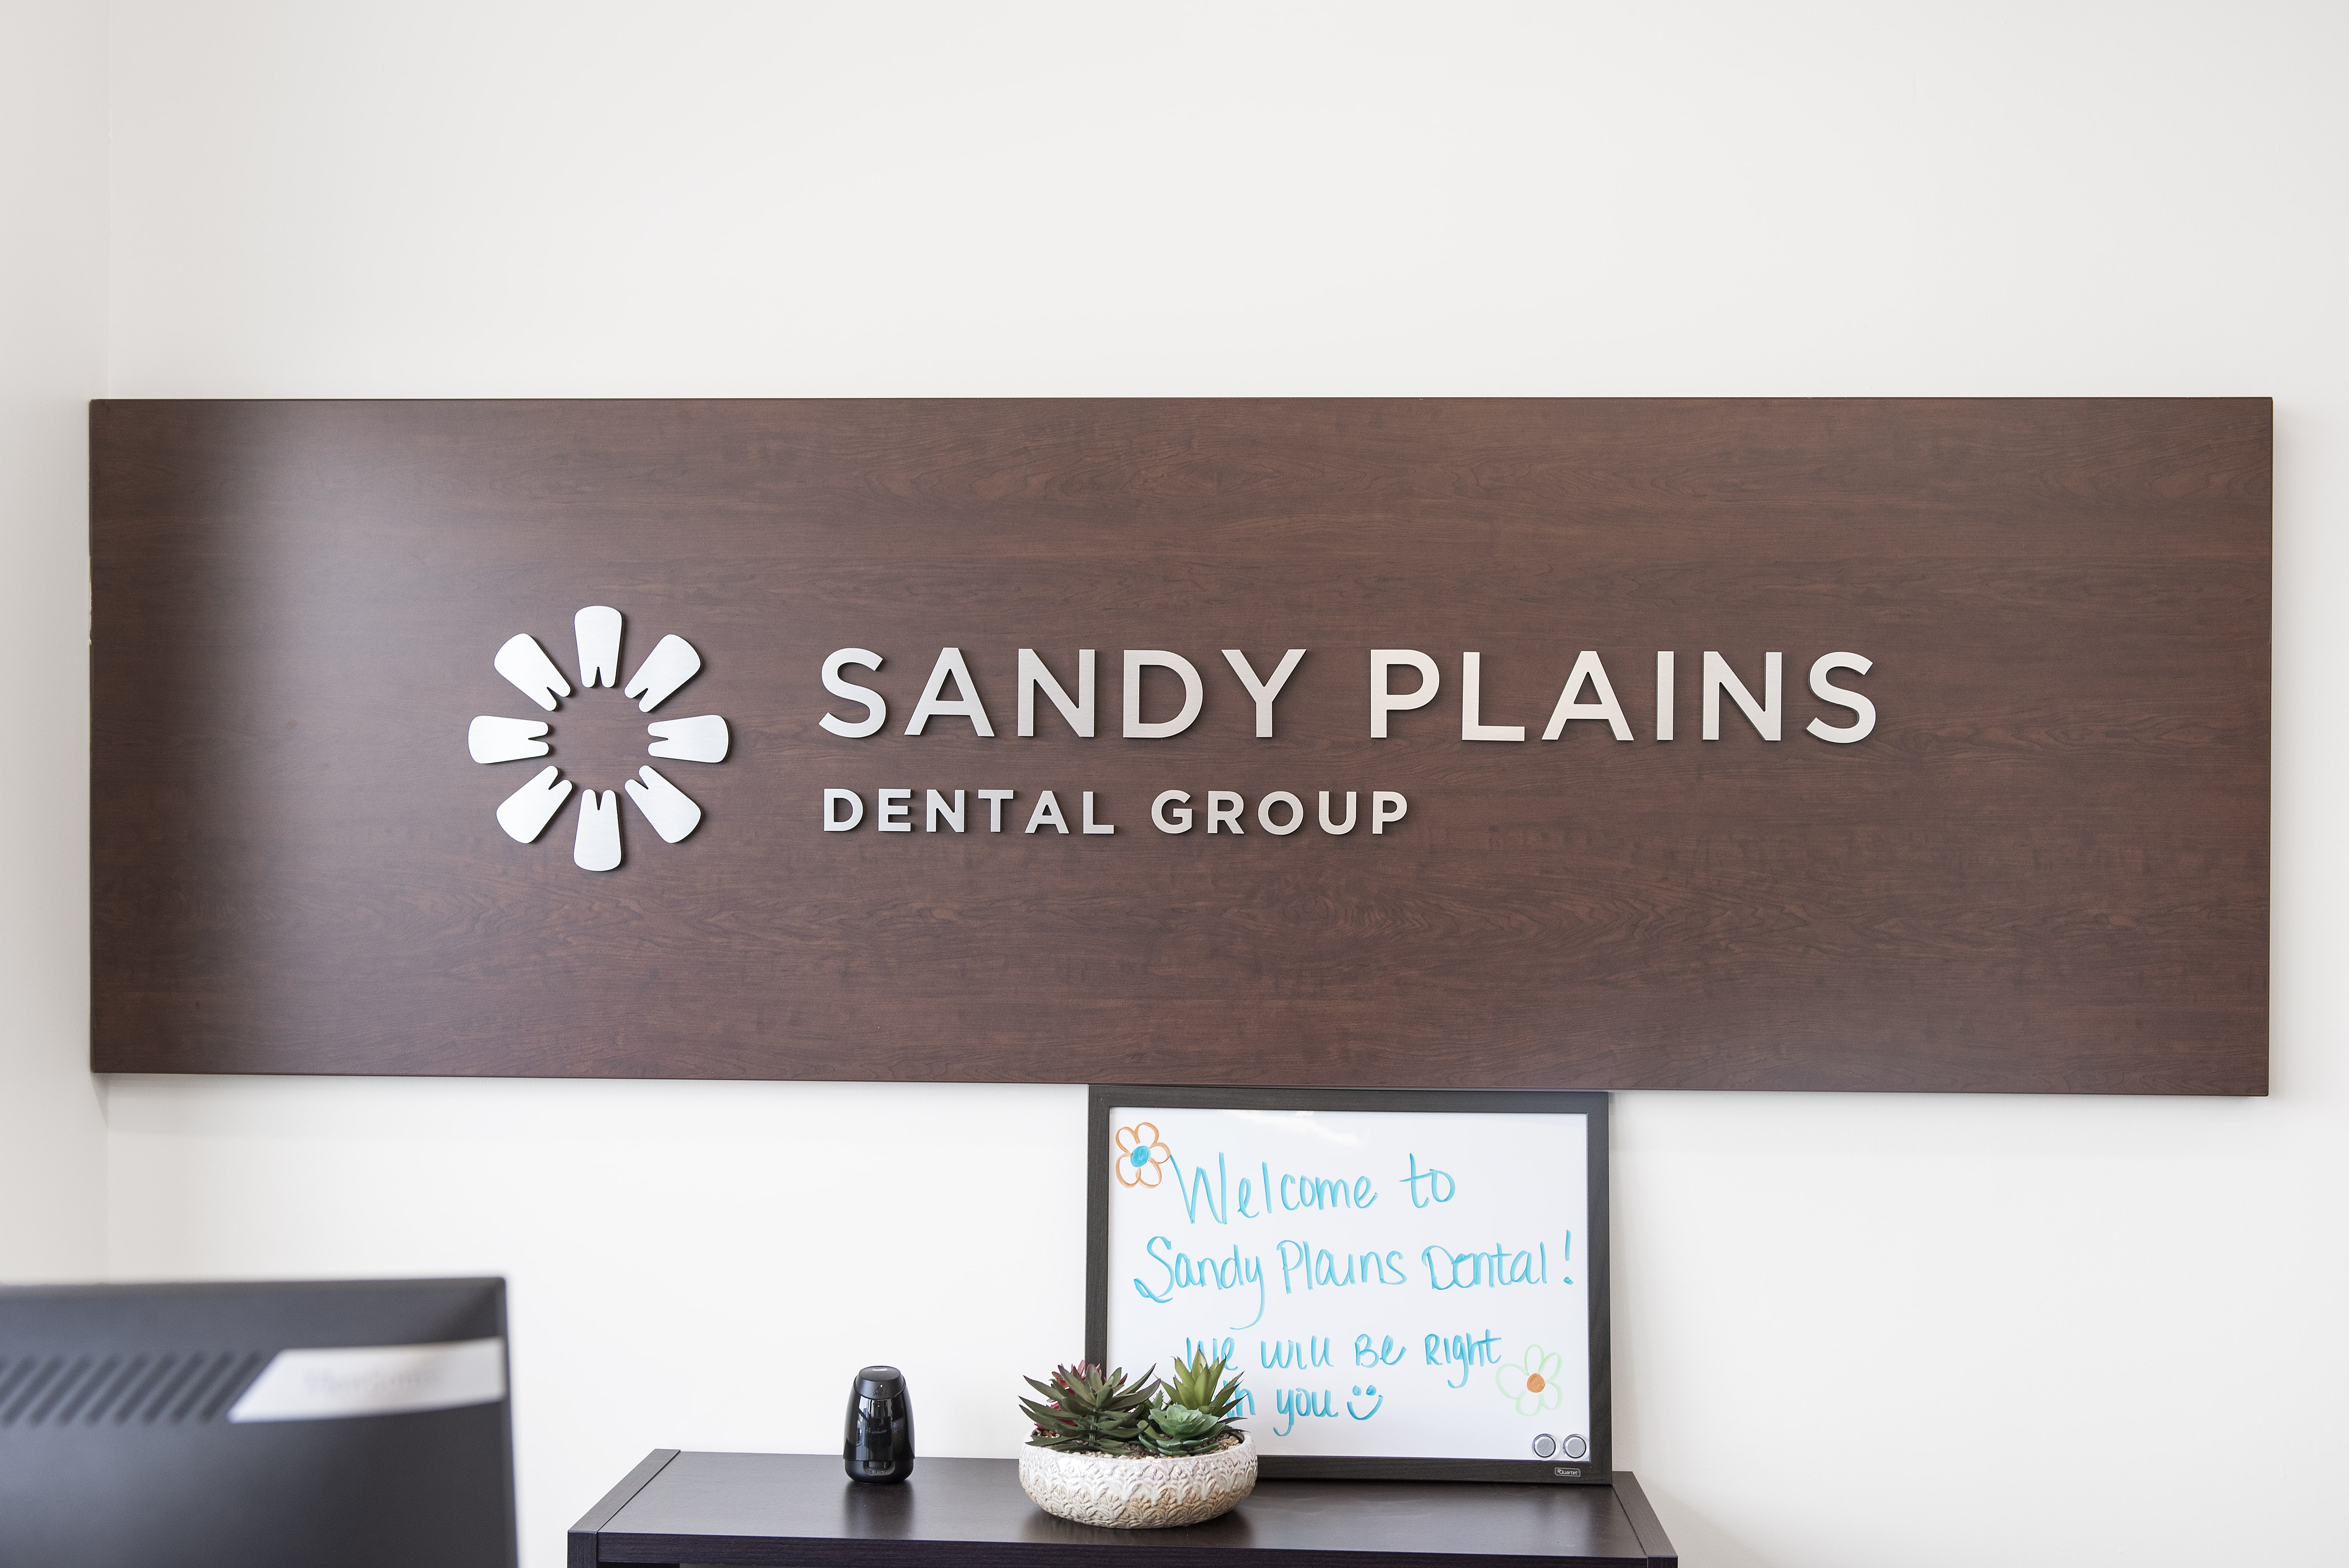 Sandy Plains Dental Group is here to provide dental care for your entire family.